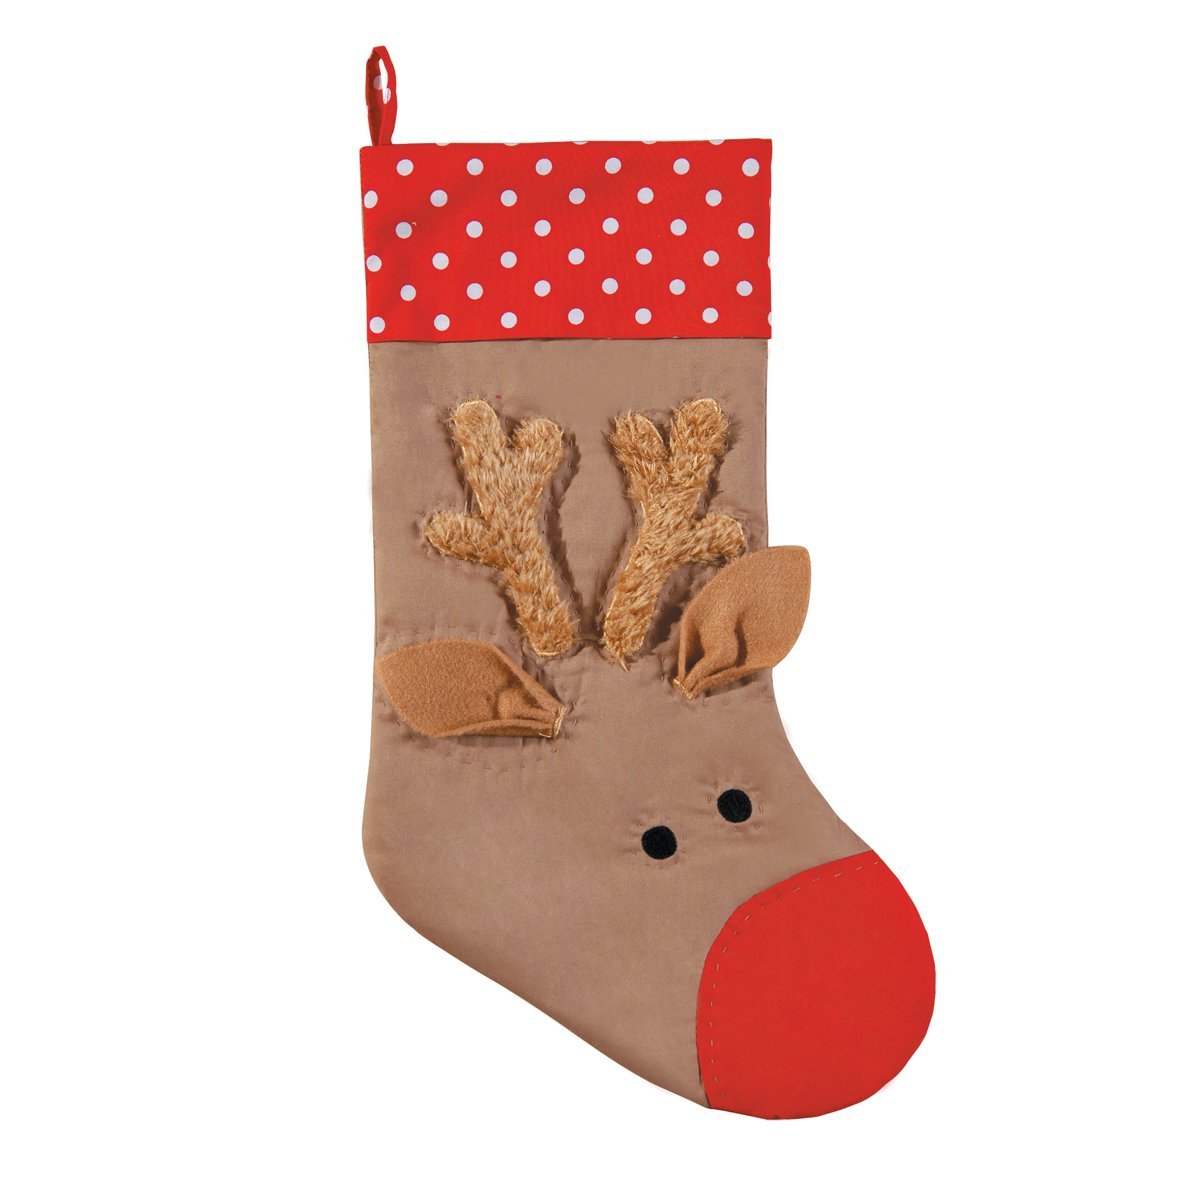 7 Cutest Christmas Stockings for Kids - FamilyEducation